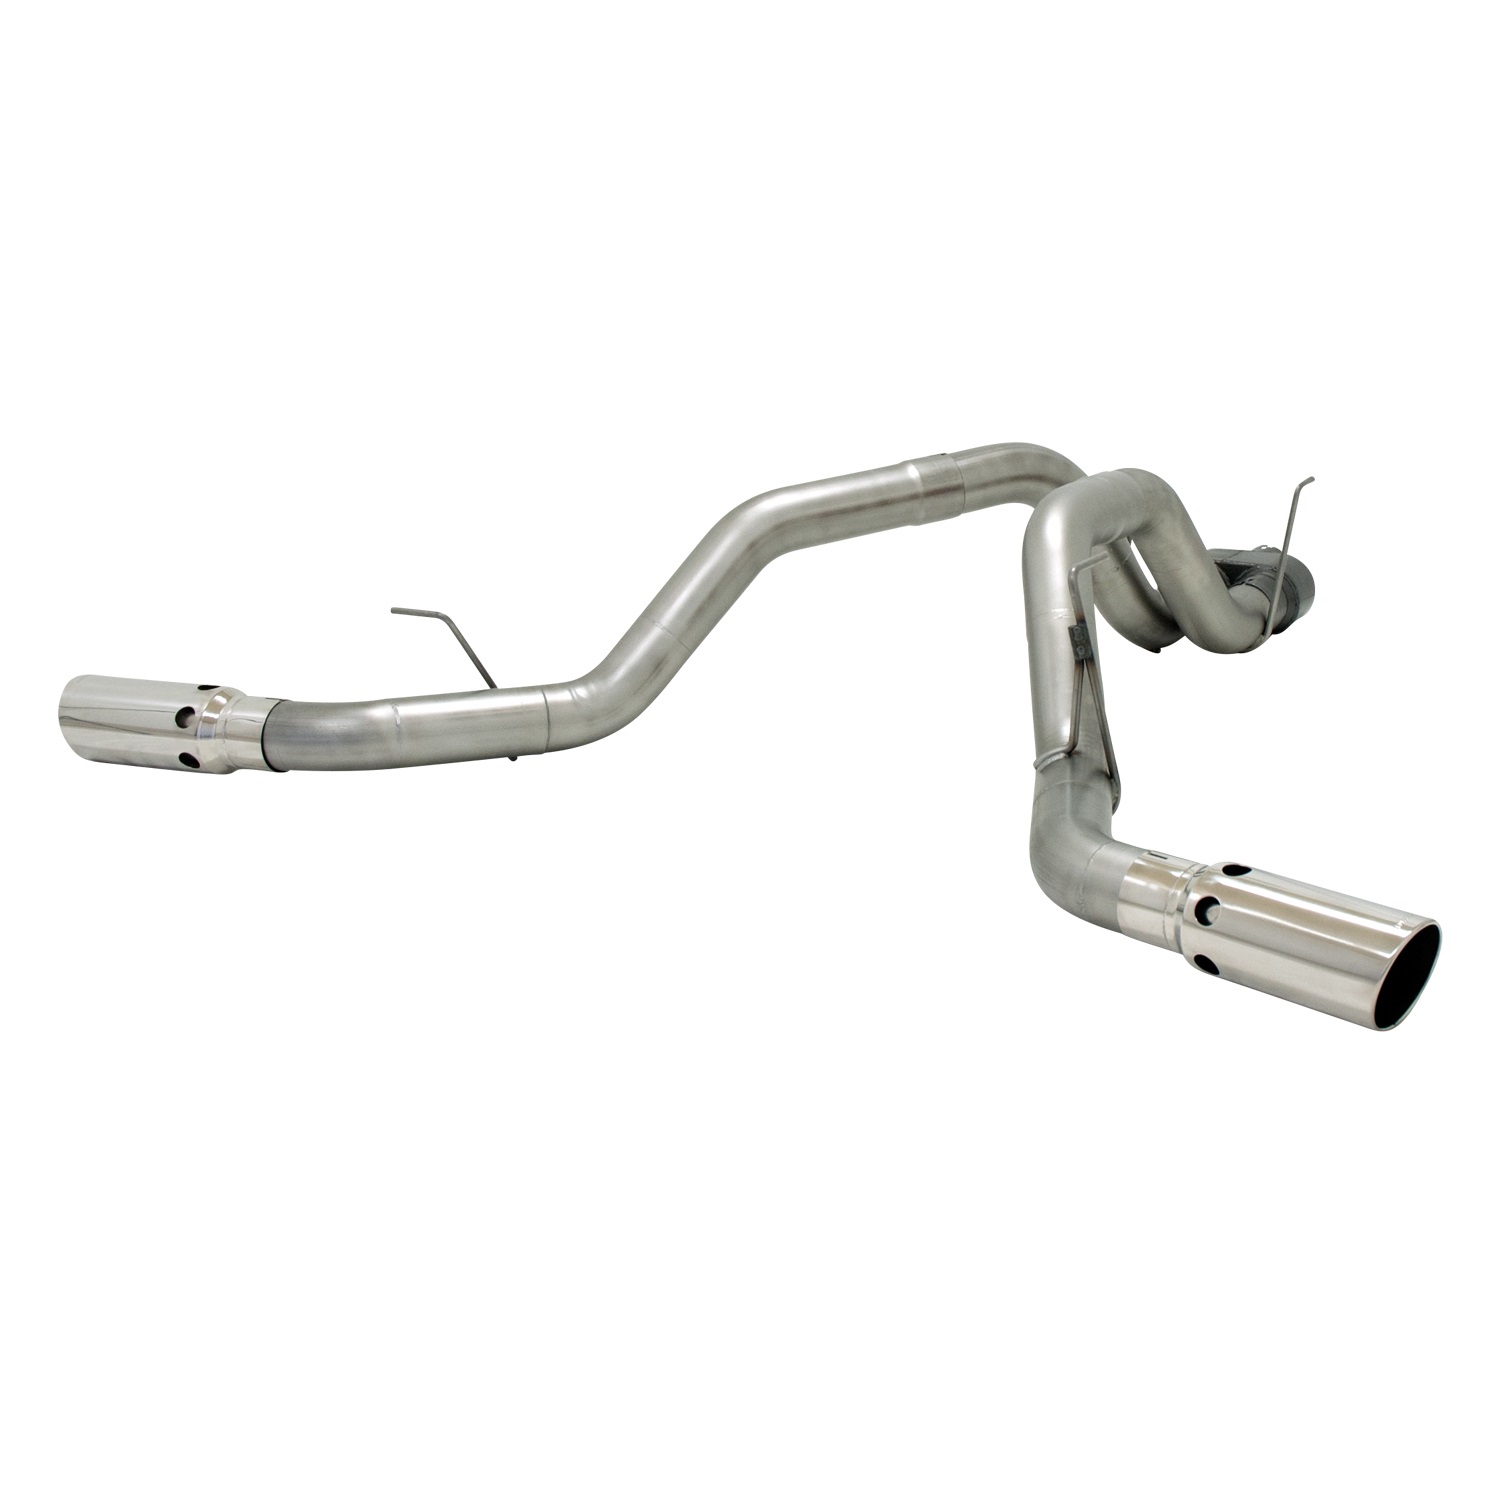 Flowmaster Flowmaster 817652 Force II Axle Back Exhaust System